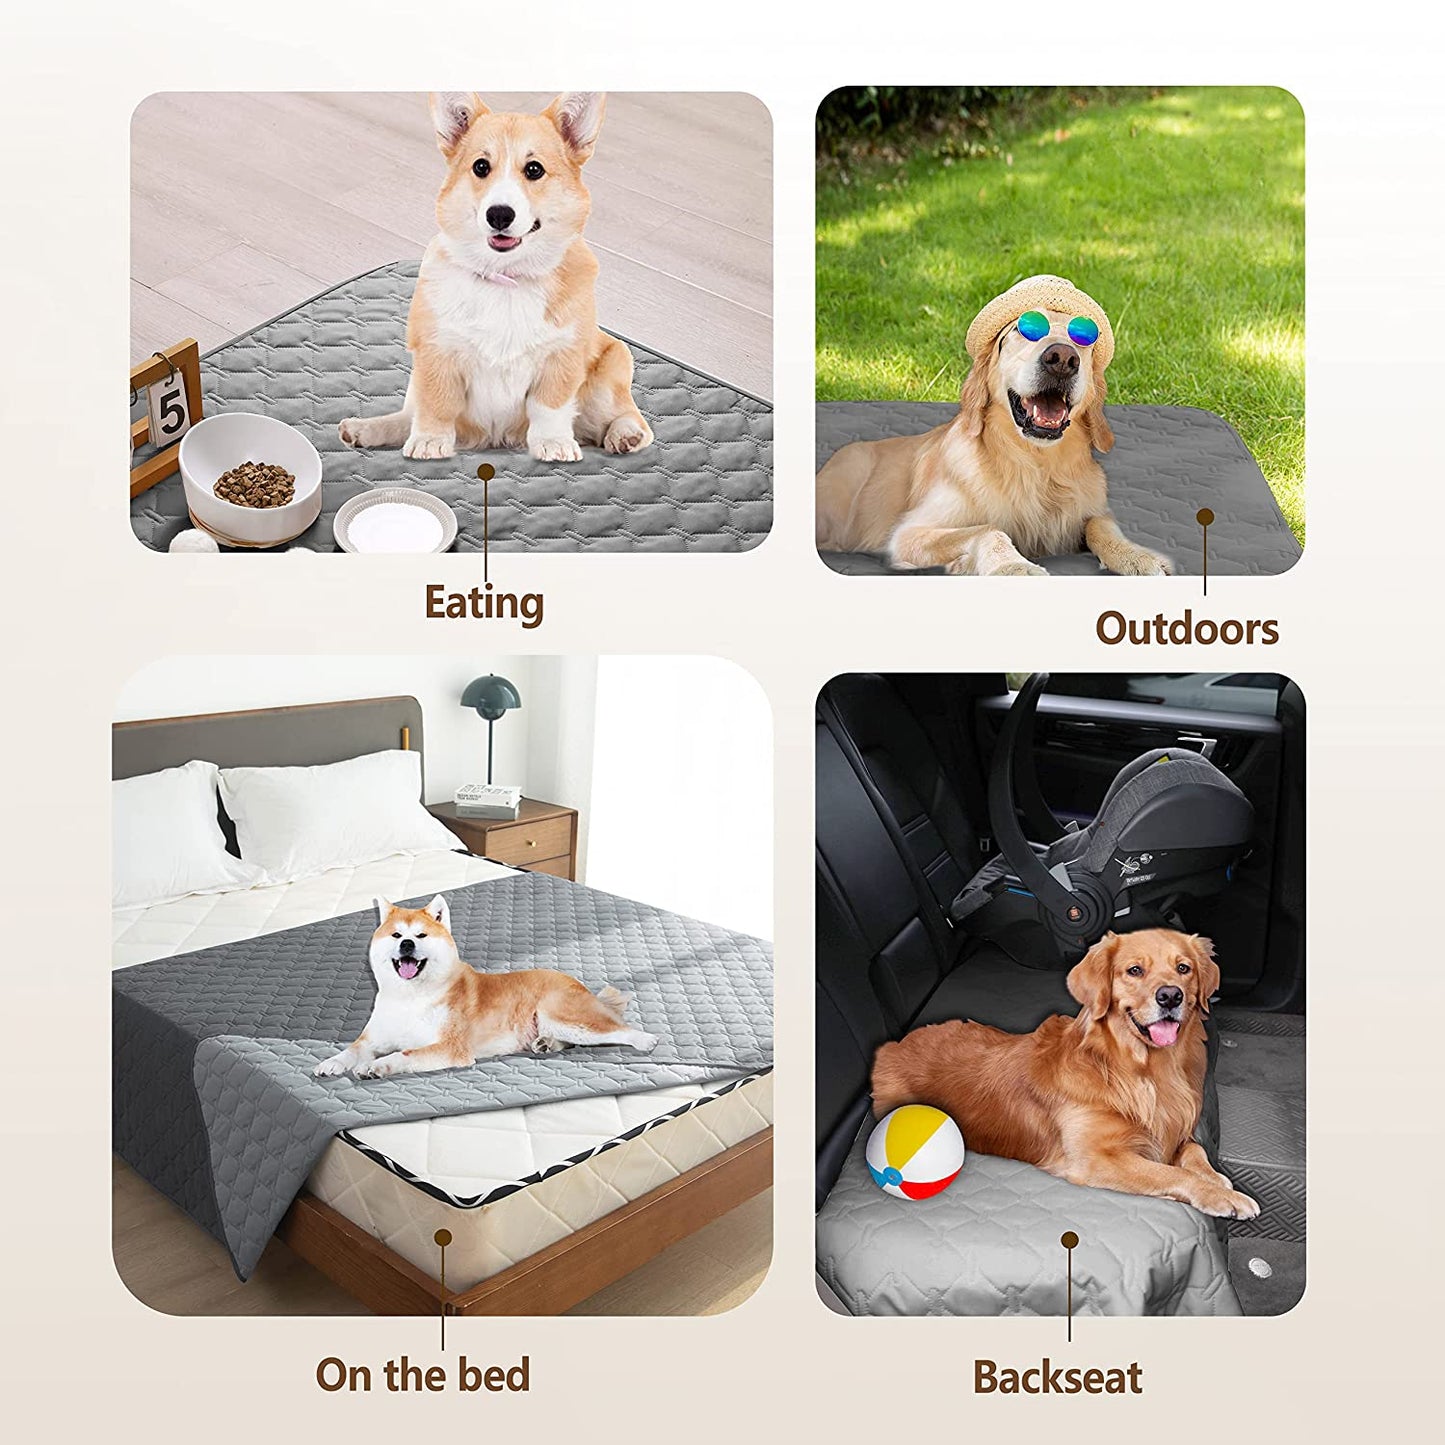 100% Double-Sided Waterproof Dog Bed Cover Pet Blanket Sofa Couch Furniture Protector for Kids Children Dog Cat, Reversible (52X82 Inch (Pack of 1), Dark Grey/Light Grey)